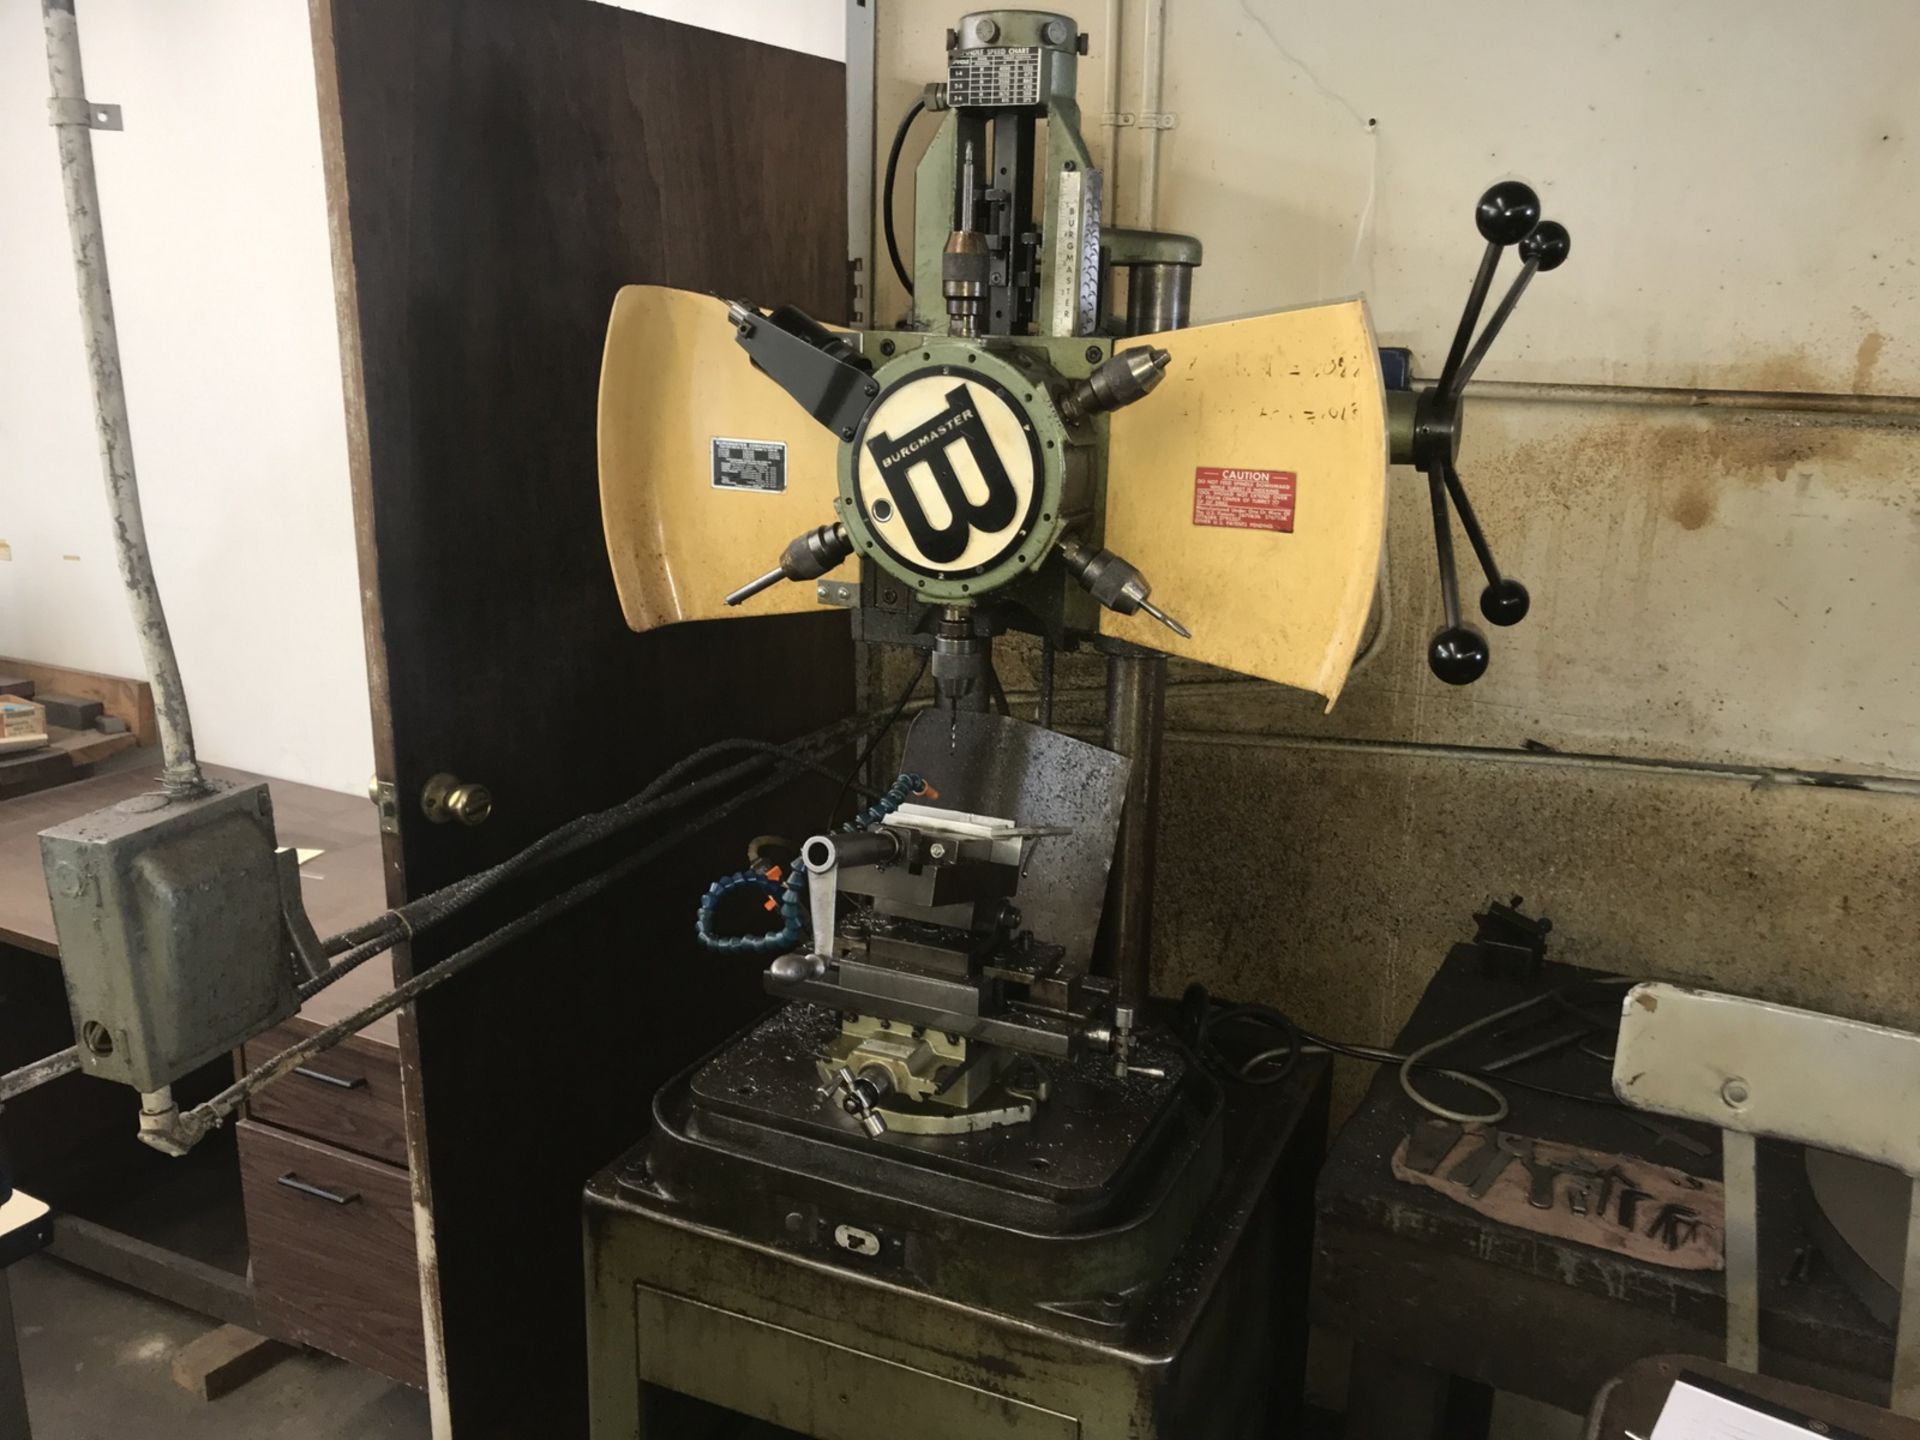 Burgmaster Mdl. ID-2923 Turret Drill Press, 6-Position Turret, Bench Mounted (This Lot is located at